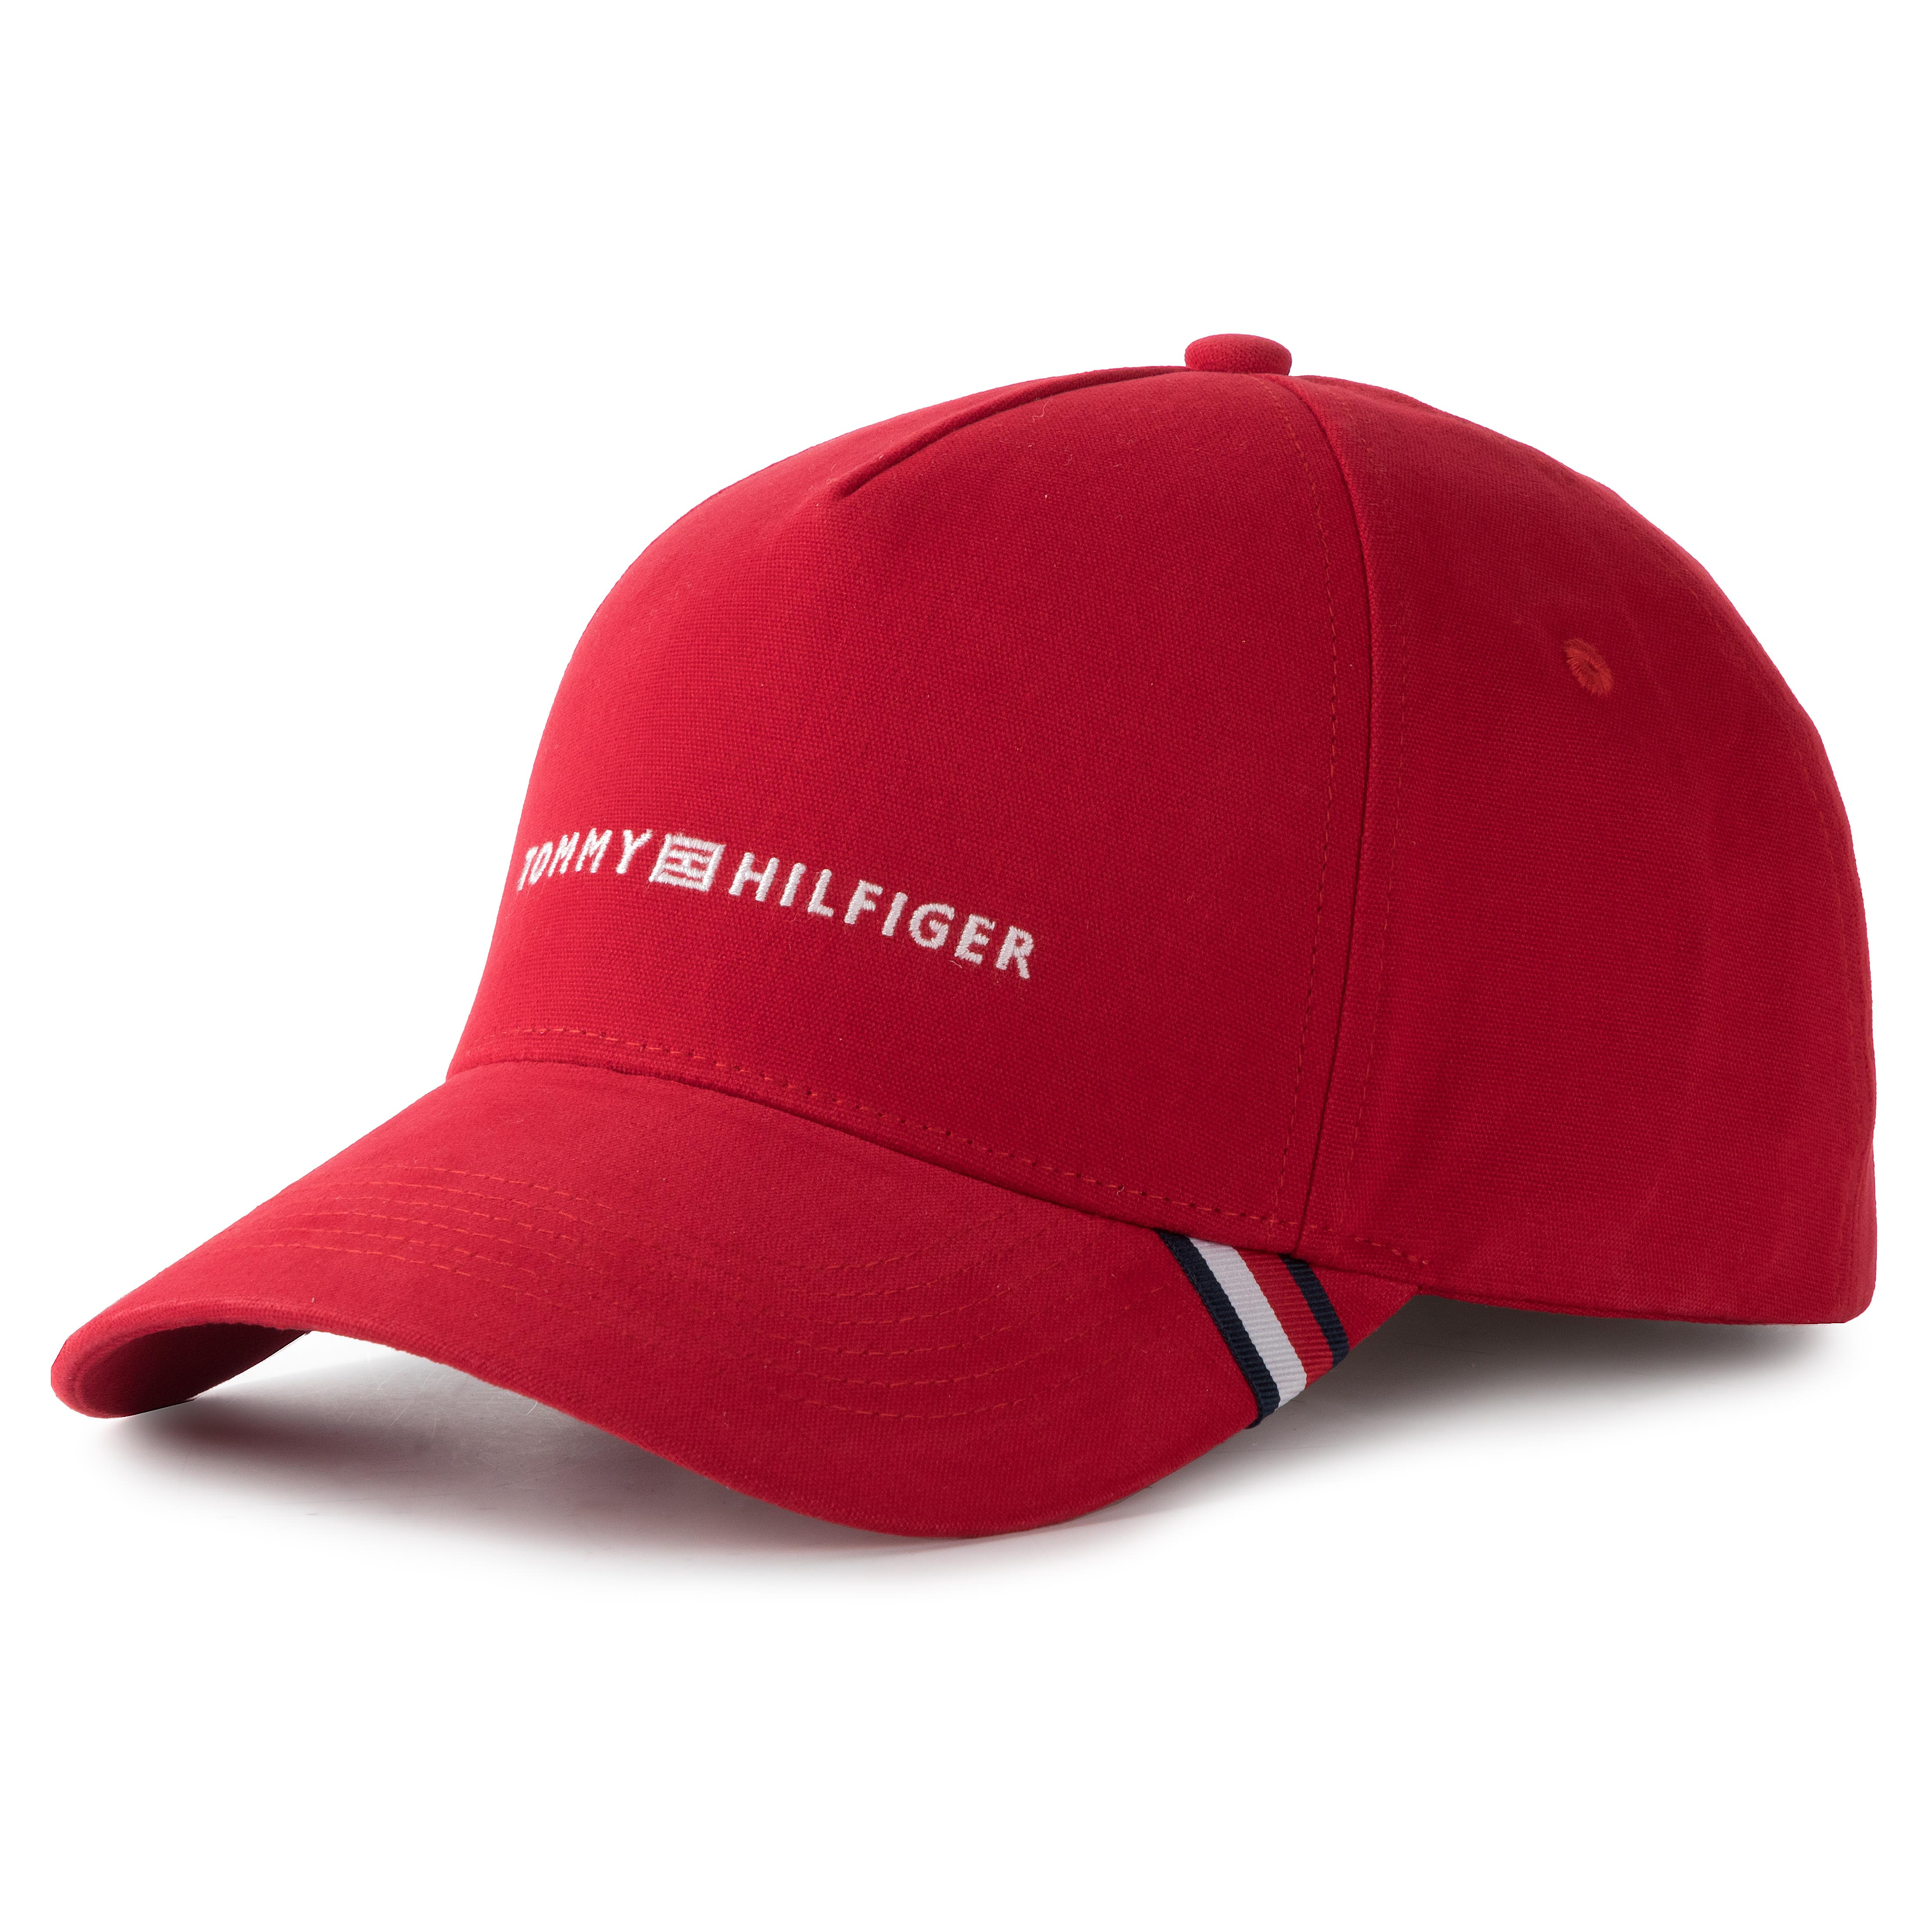 Tommy Hilfiger Gorra Classic Rojo Mujer y Hombre